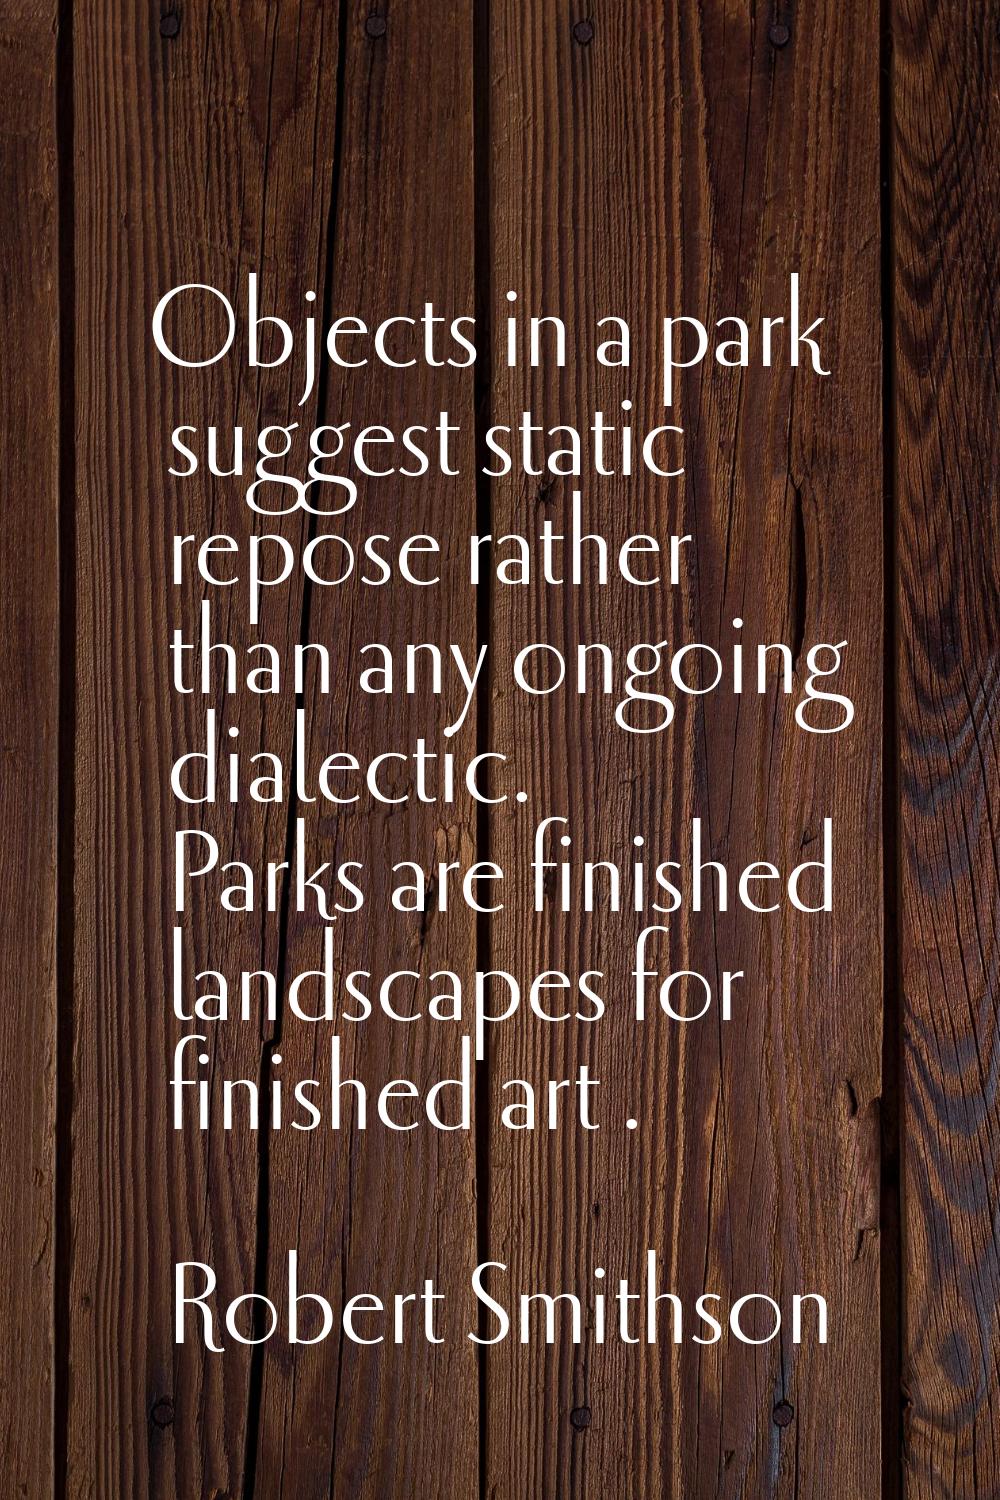 Objects in a park suggest static repose rather than any ongoing dialectic. Parks are finished lands